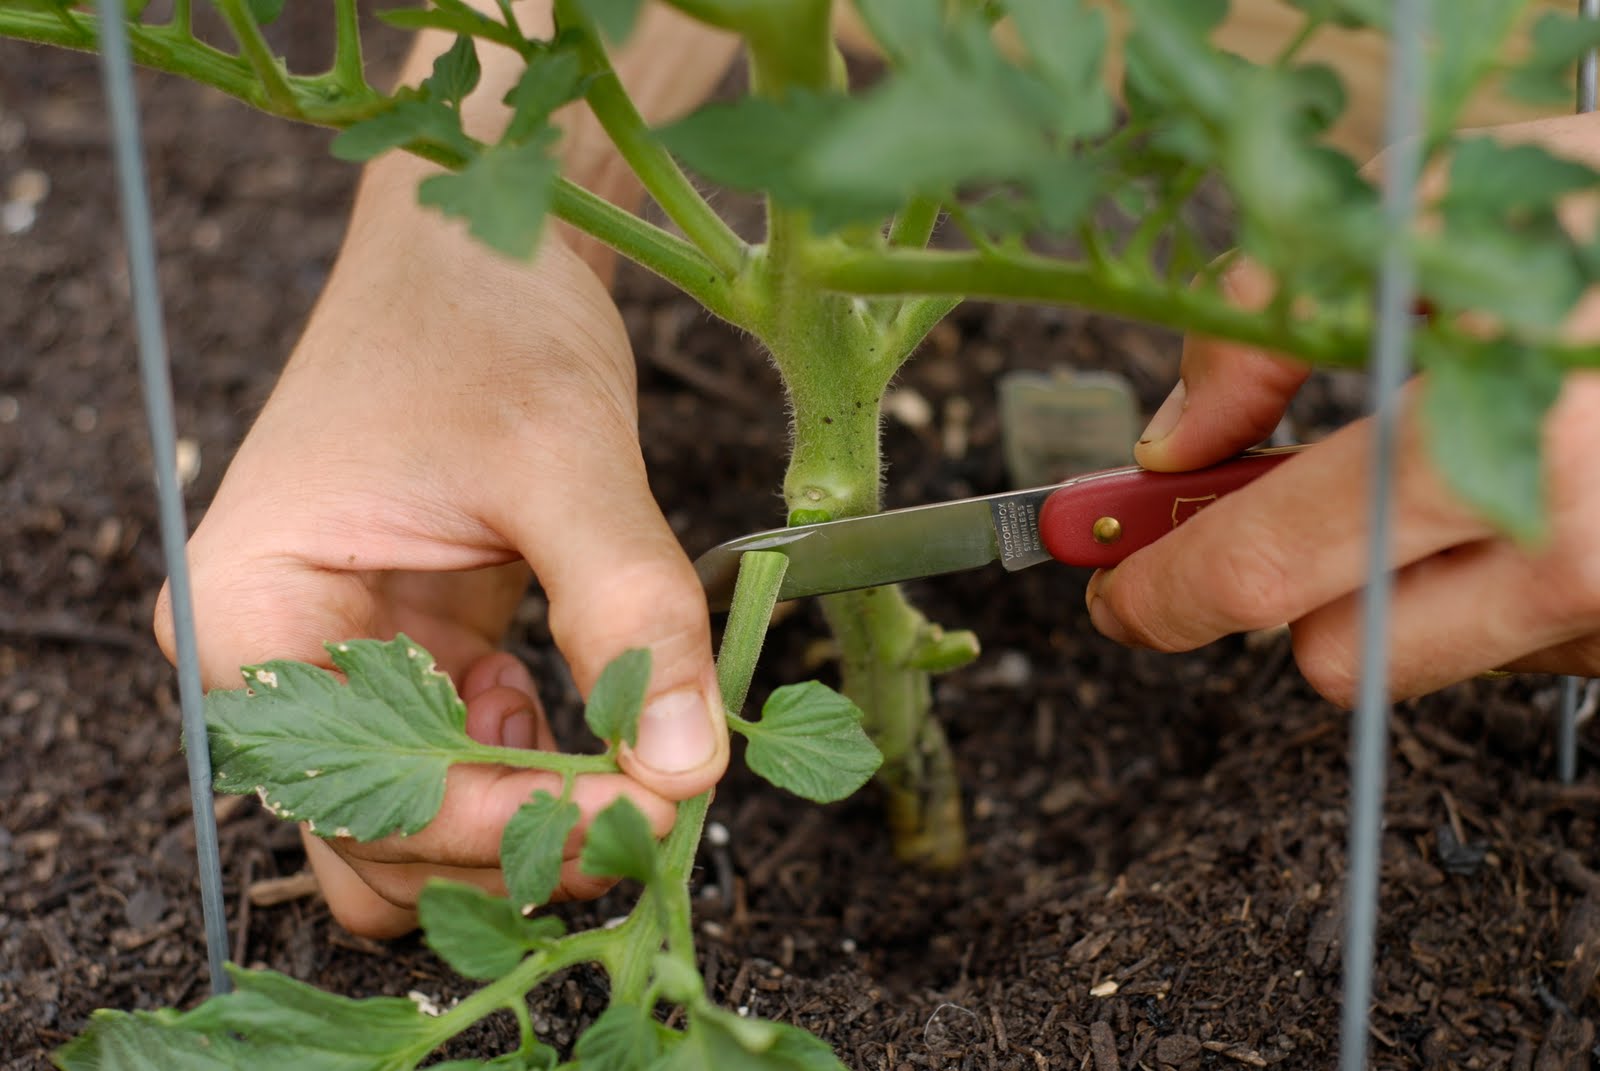 Tend Pruning Tomatoes